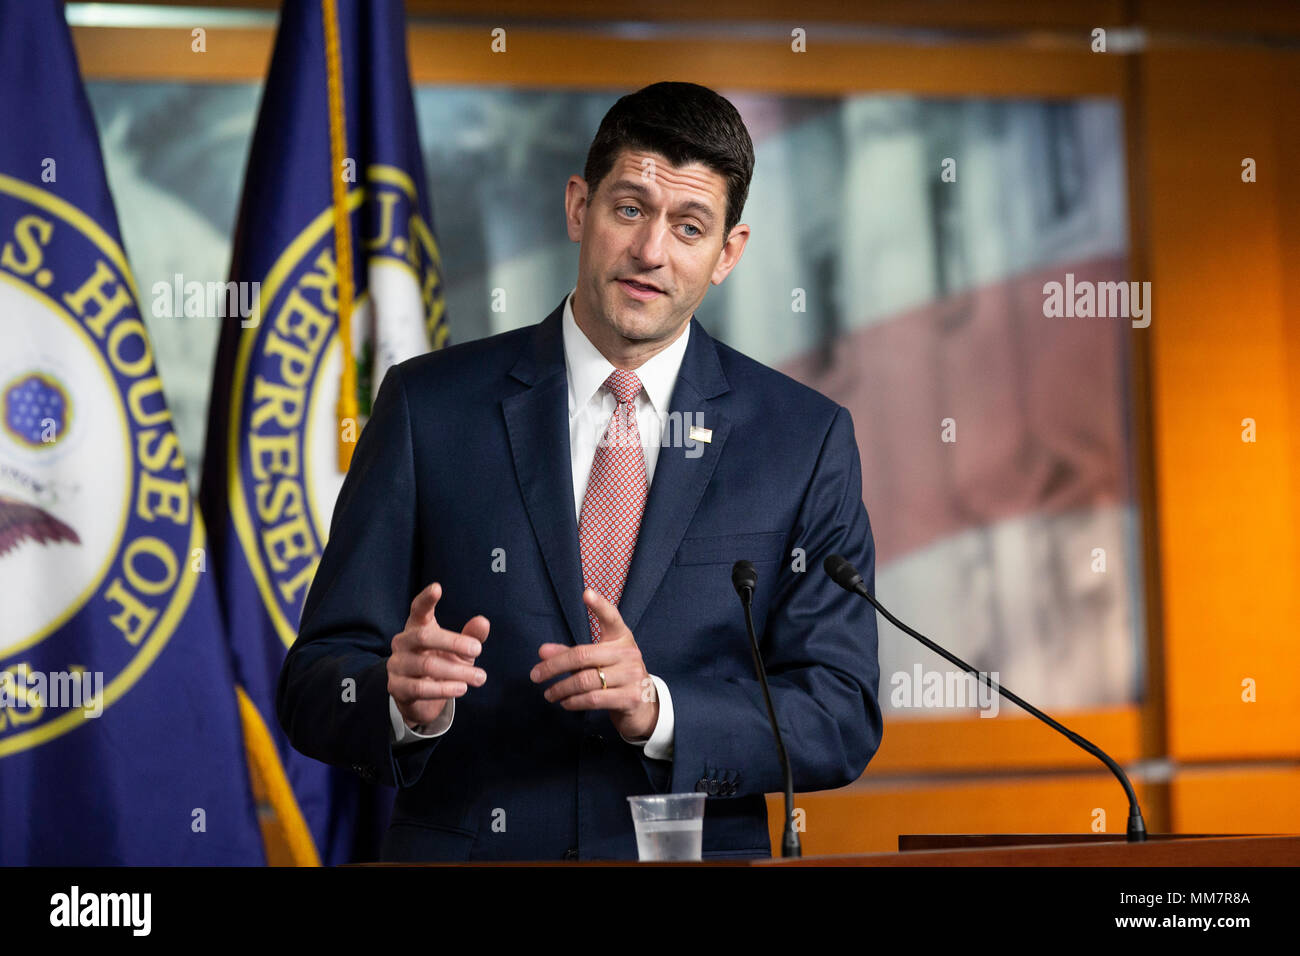 Washington, USA. 10th May, 2018. Speaker of the House of Representatives Paul Ryan, Republican of Wisconsin, speaks with reporters during his weekly press conference at the United States Capitol in Washingon, DC on May 10, 2018. Credit: The Photo Access/Alamy Live News Stock Photo